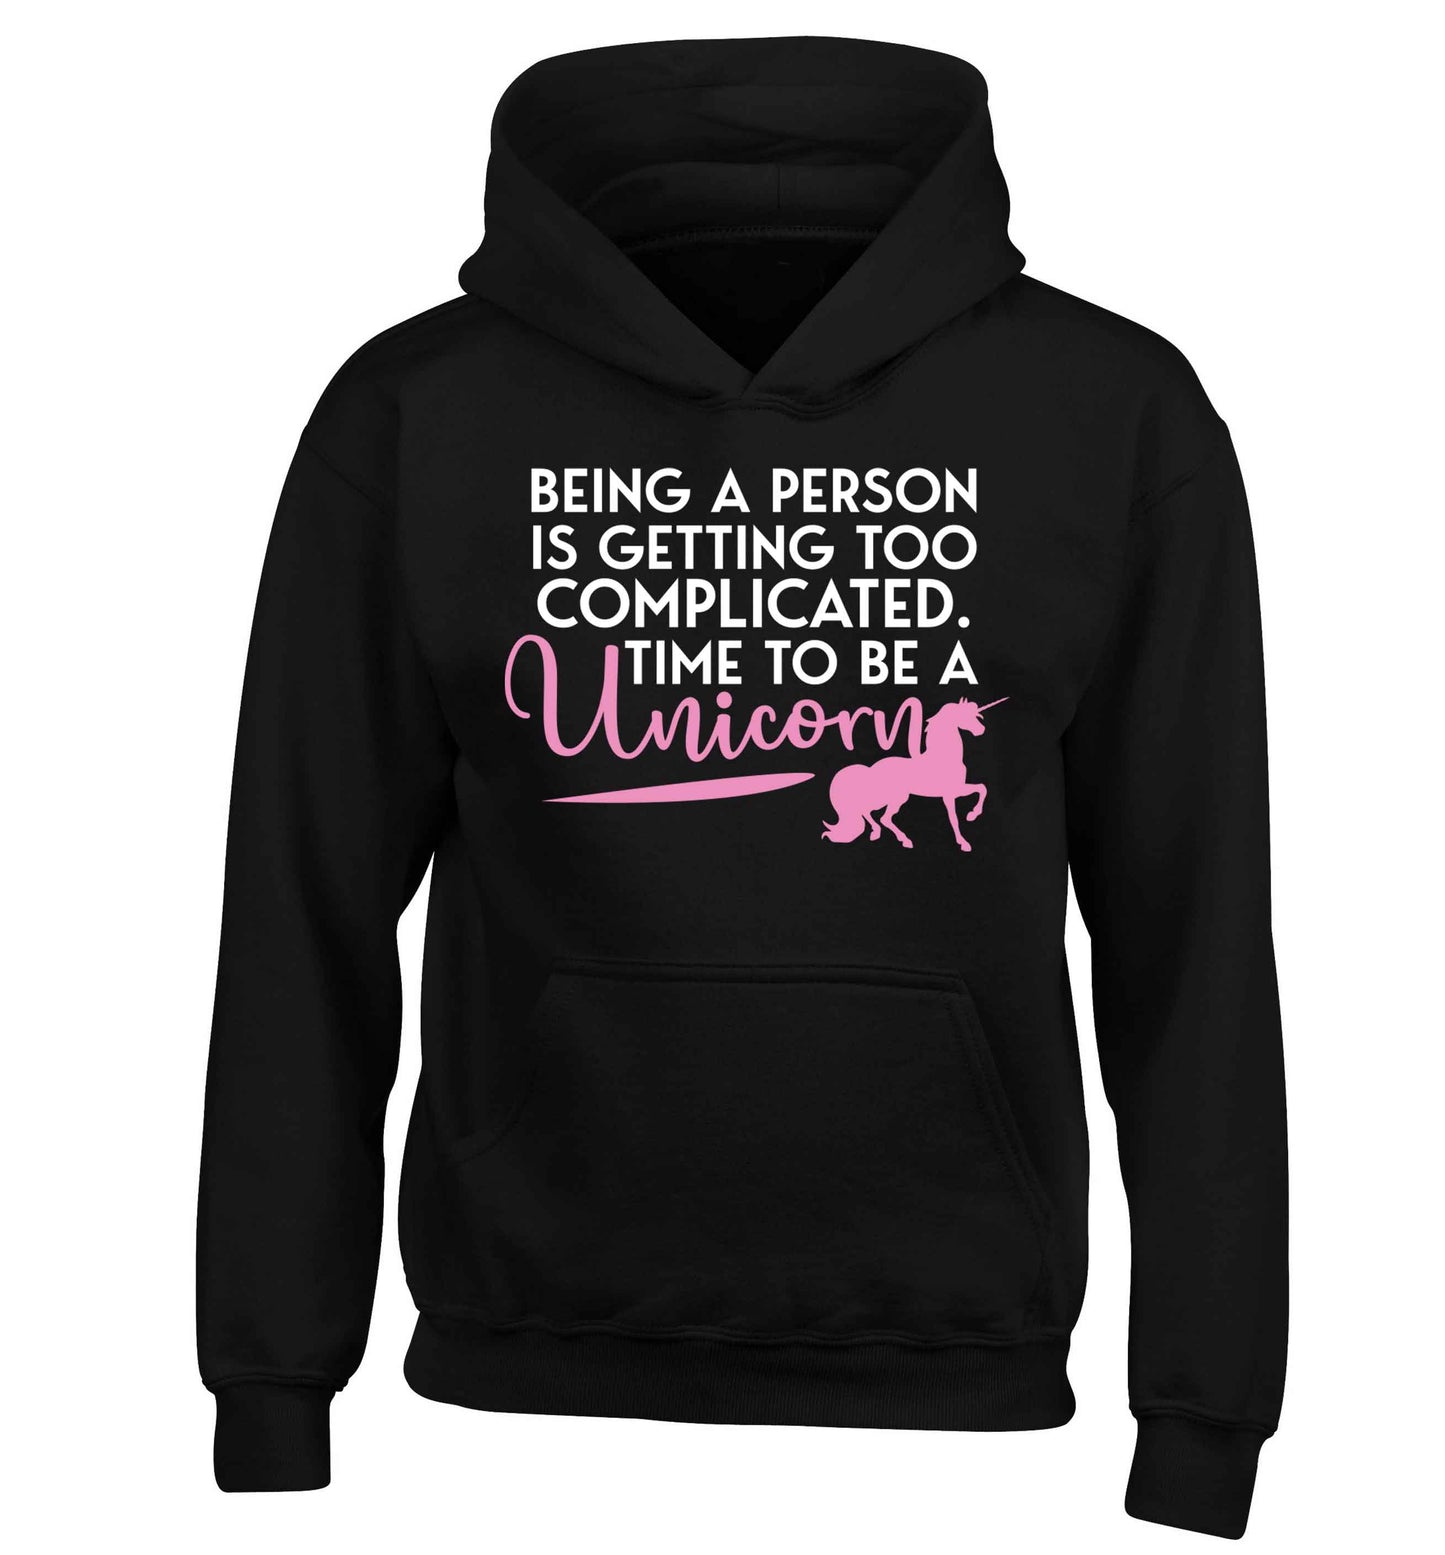 Being a person is getting too complicated time to be a unicorn children's black hoodie 12-13 Years